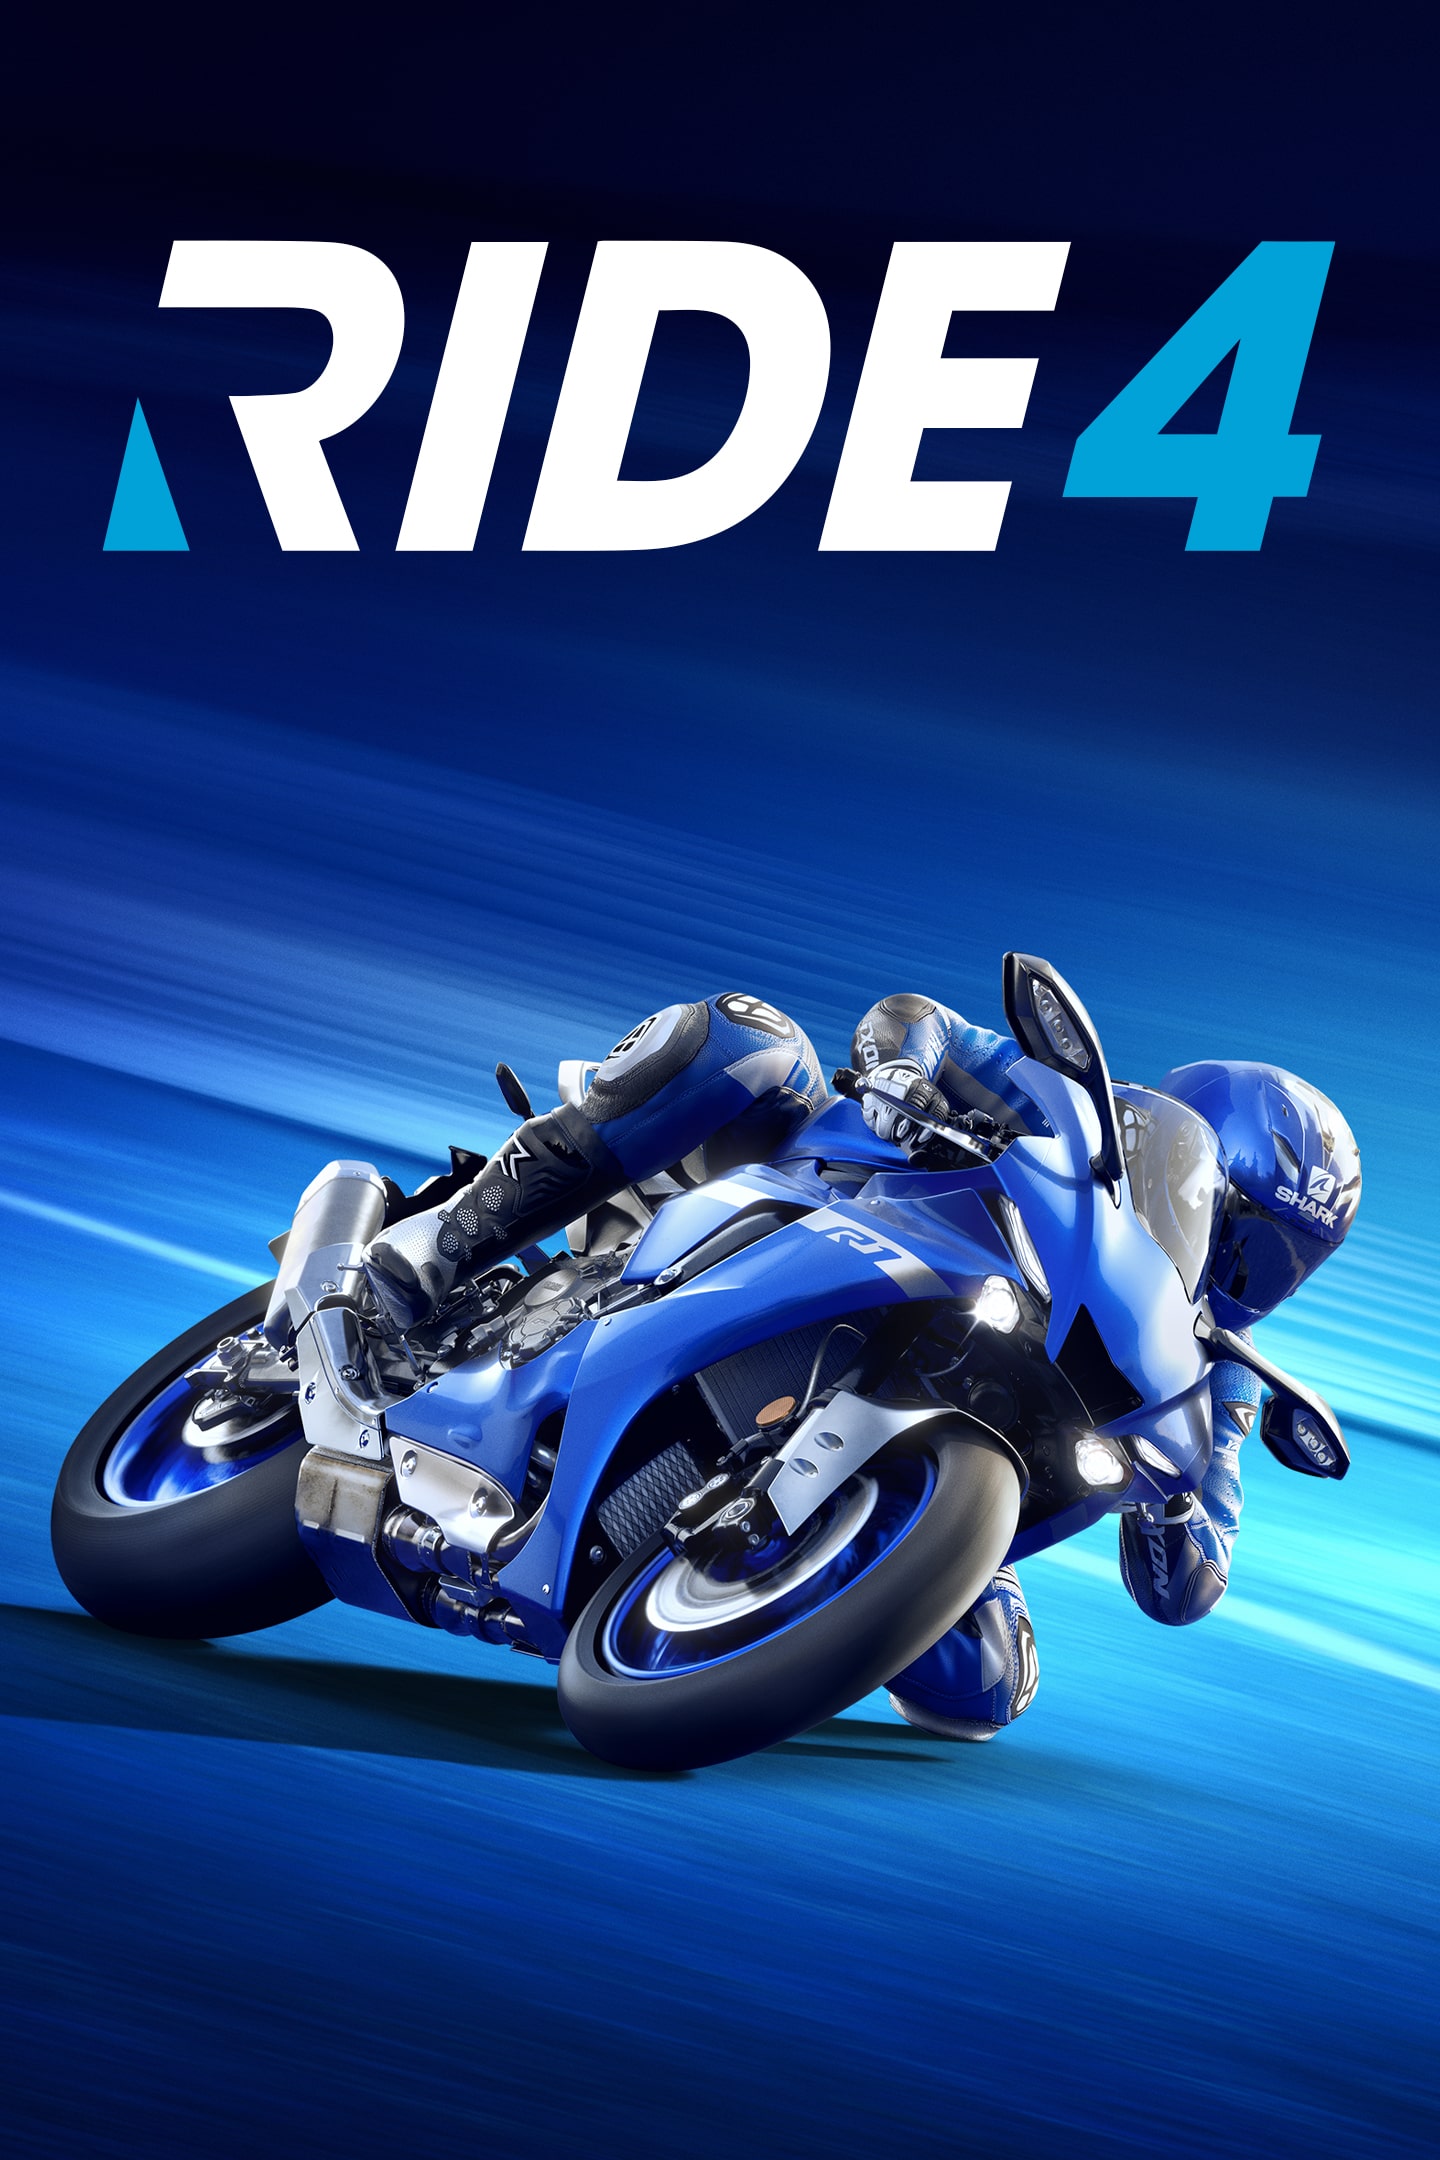 RIDE OR DIEステッカー2枚セットイエロー